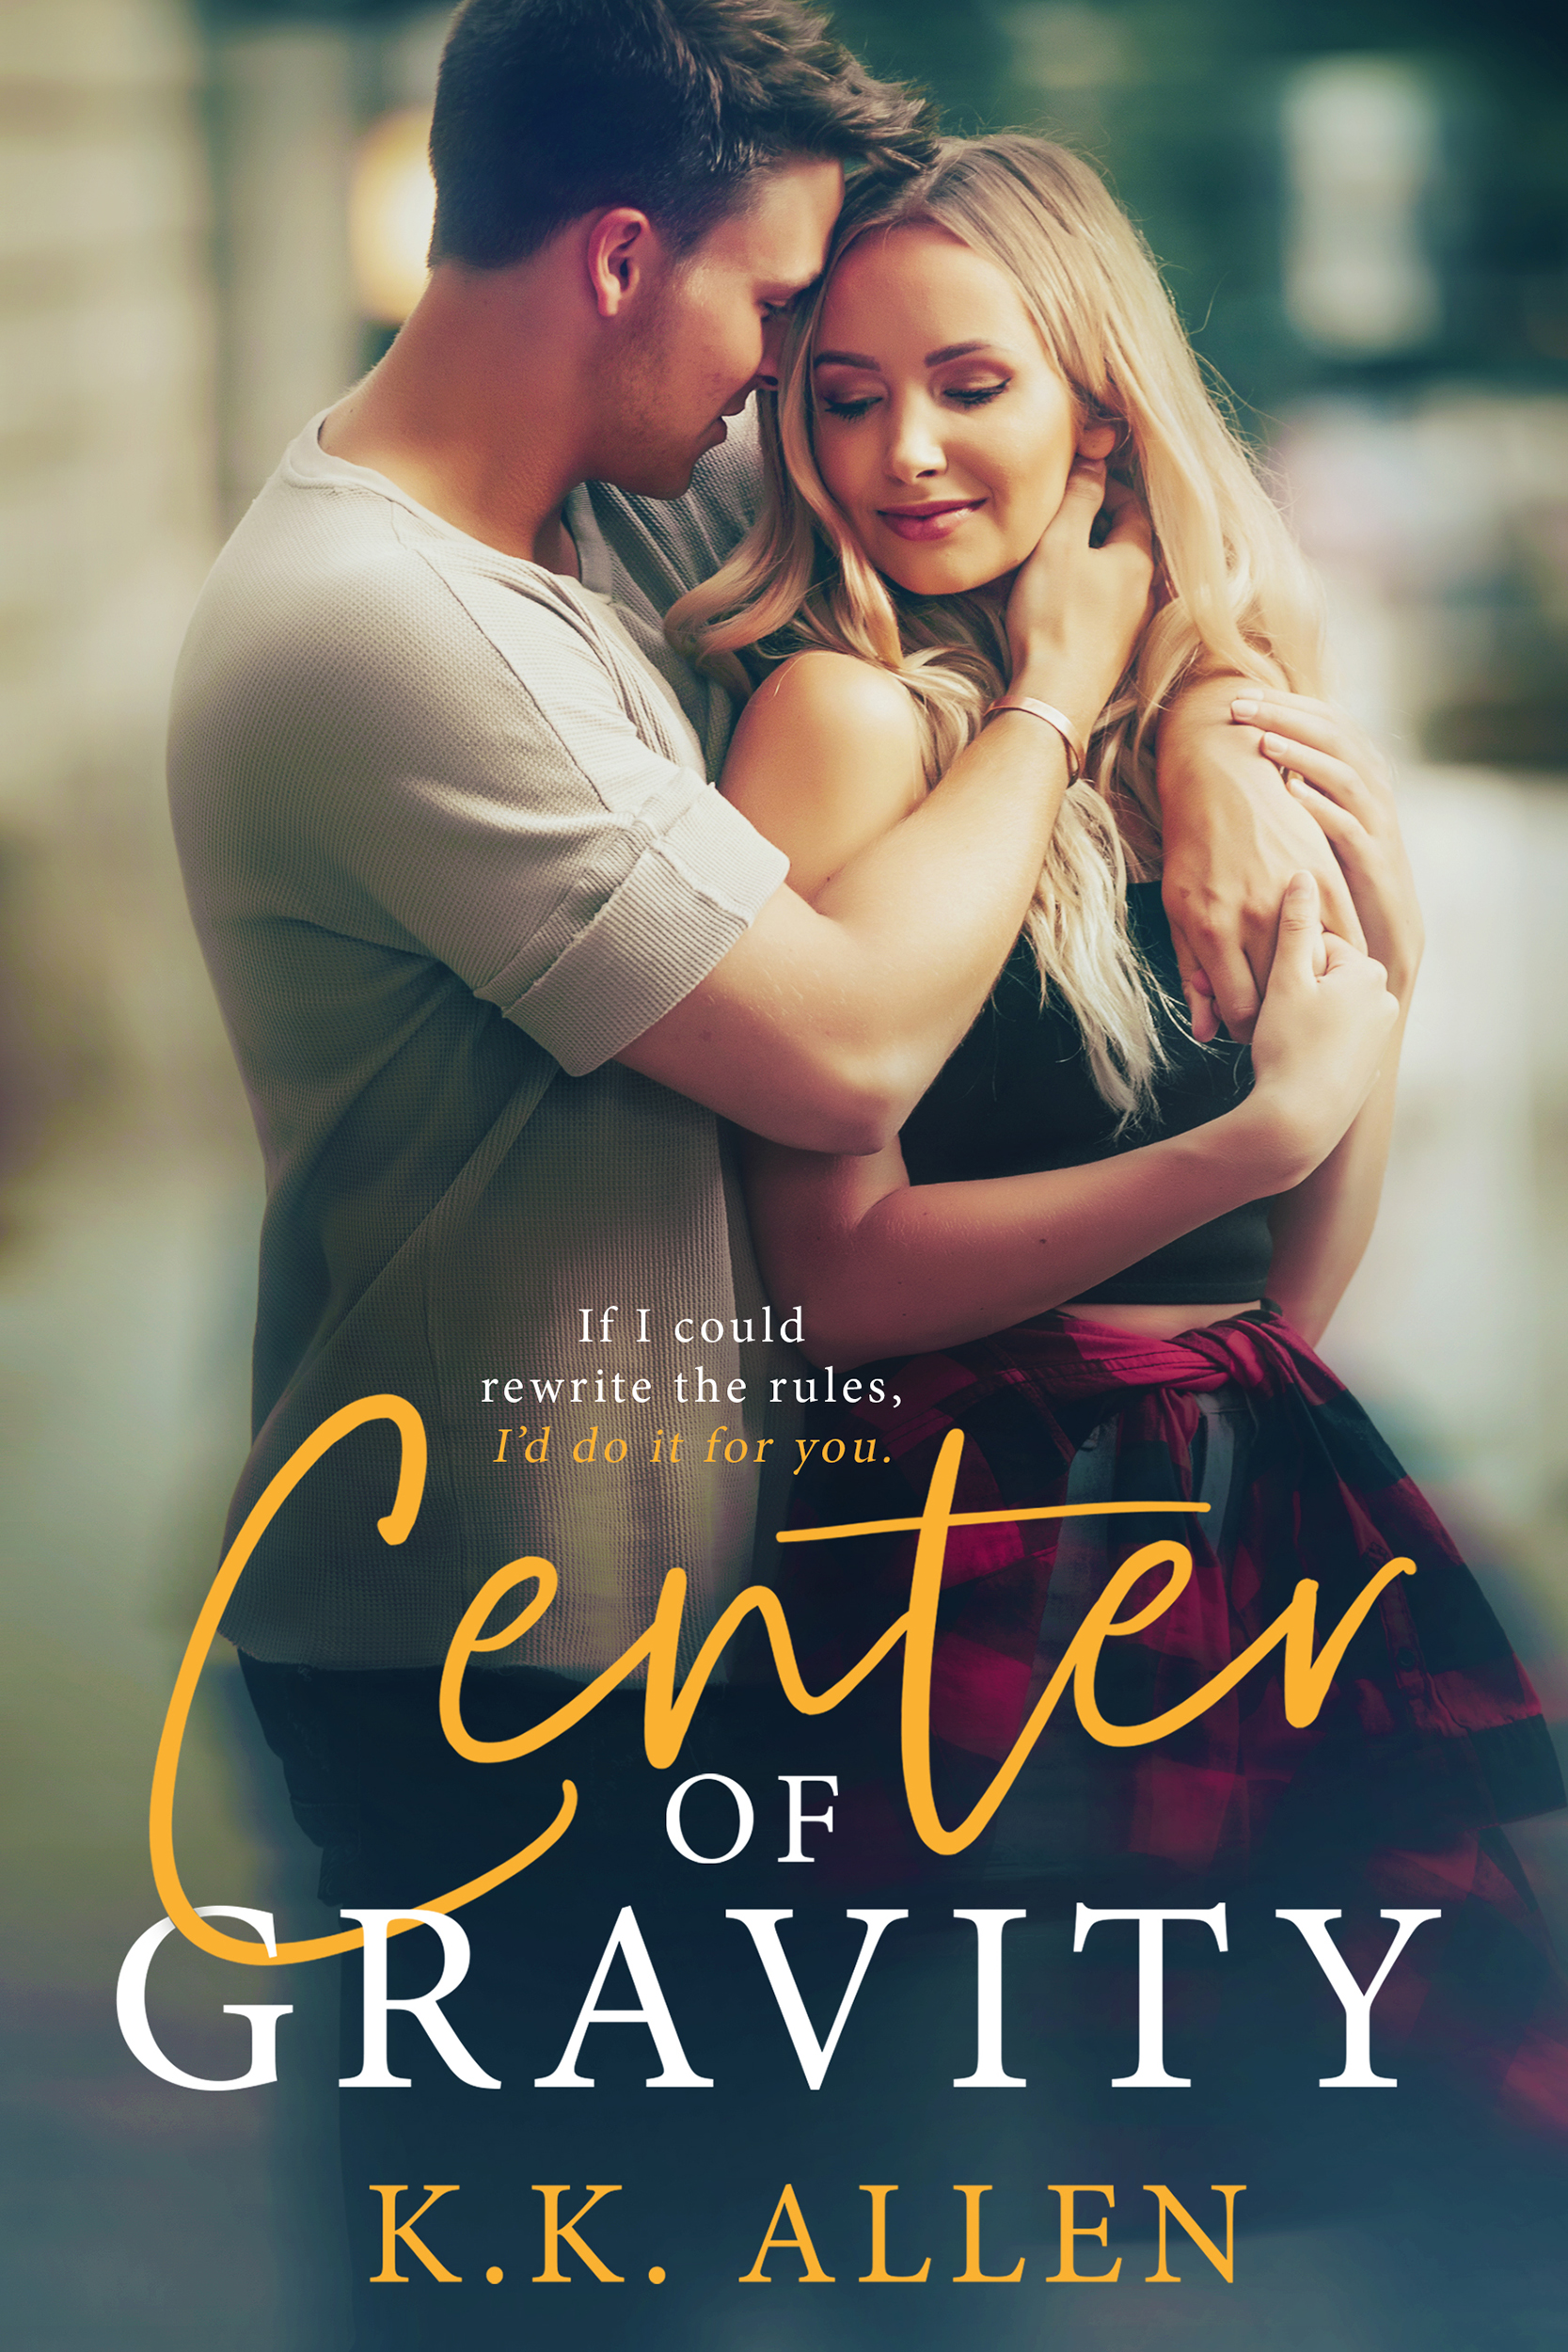 Center of Gravity by K.K. Allen [Review]